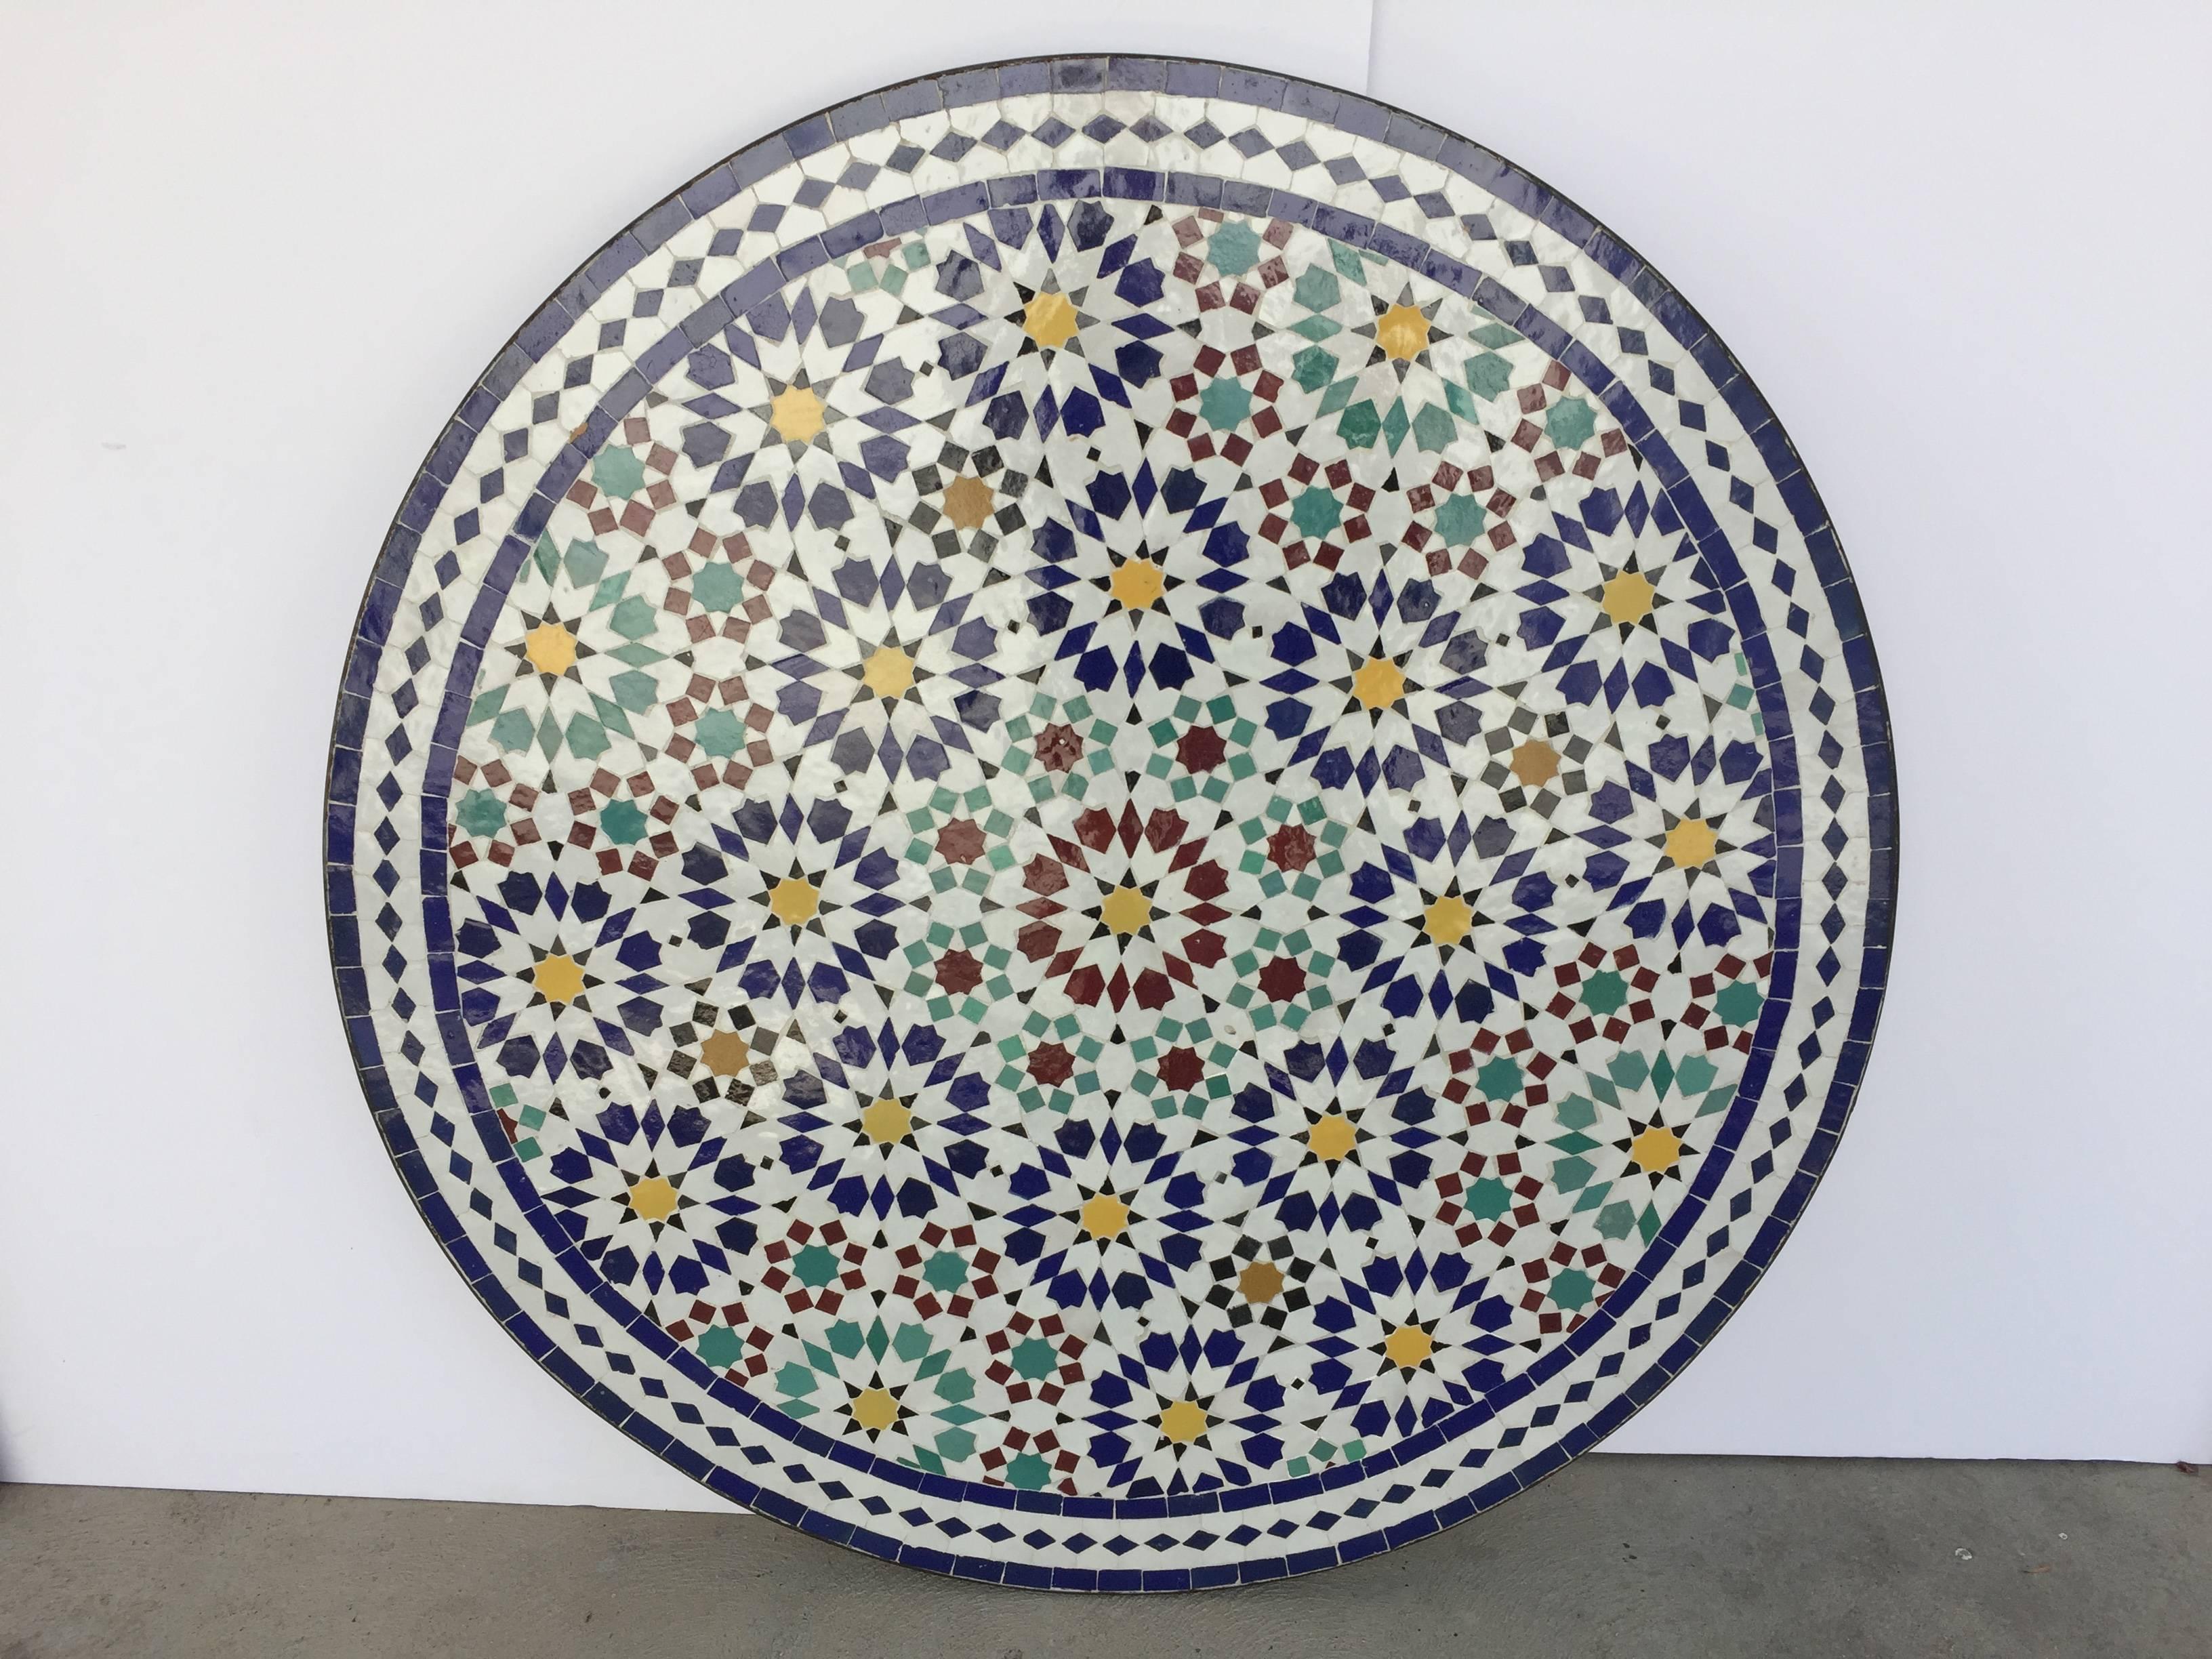 Great Moroccan mosaic round tile coffee table, delicately handcrafted in Fez with traditional Islamic Moorish geometric design in white, yellow, blue, red, green colors.
The zellige tile table sits on an iron hand-forged base in black color.
Great